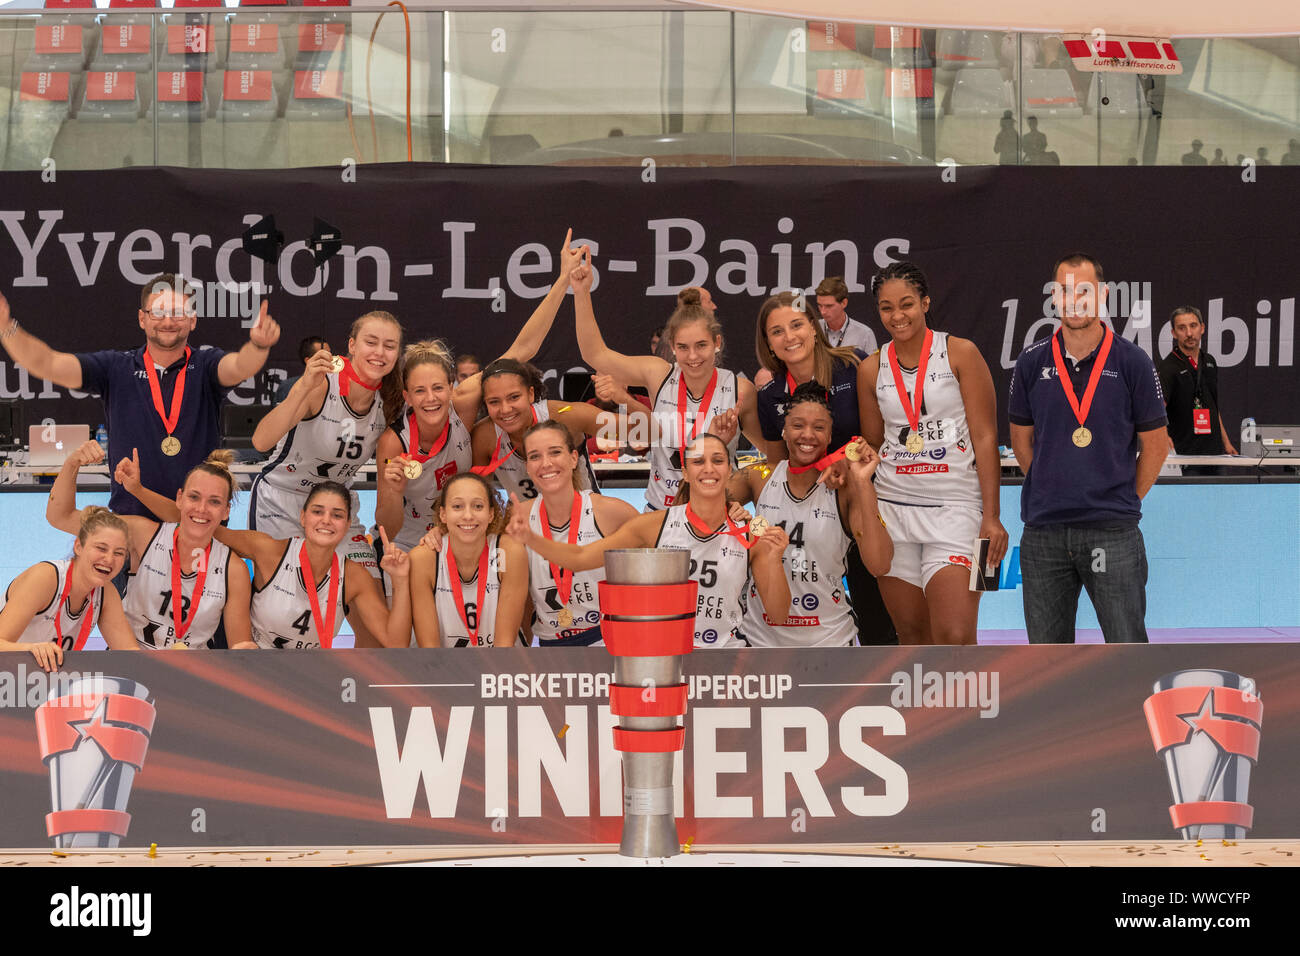 Yverdon Les Bains, Switzerland. 14th Sep, 2019. BCF ELFIC Fribourg Women's Basketball Team Savoring Their Victory During the Awards Ceremony at the Super Cup 2019 at the Yverdon-les-Bains Sports Center (Switzerland) (Photo by Eric Dubost/Pacific Press) Credit: Pacific Press Agency/Alamy Live News Stock Photo